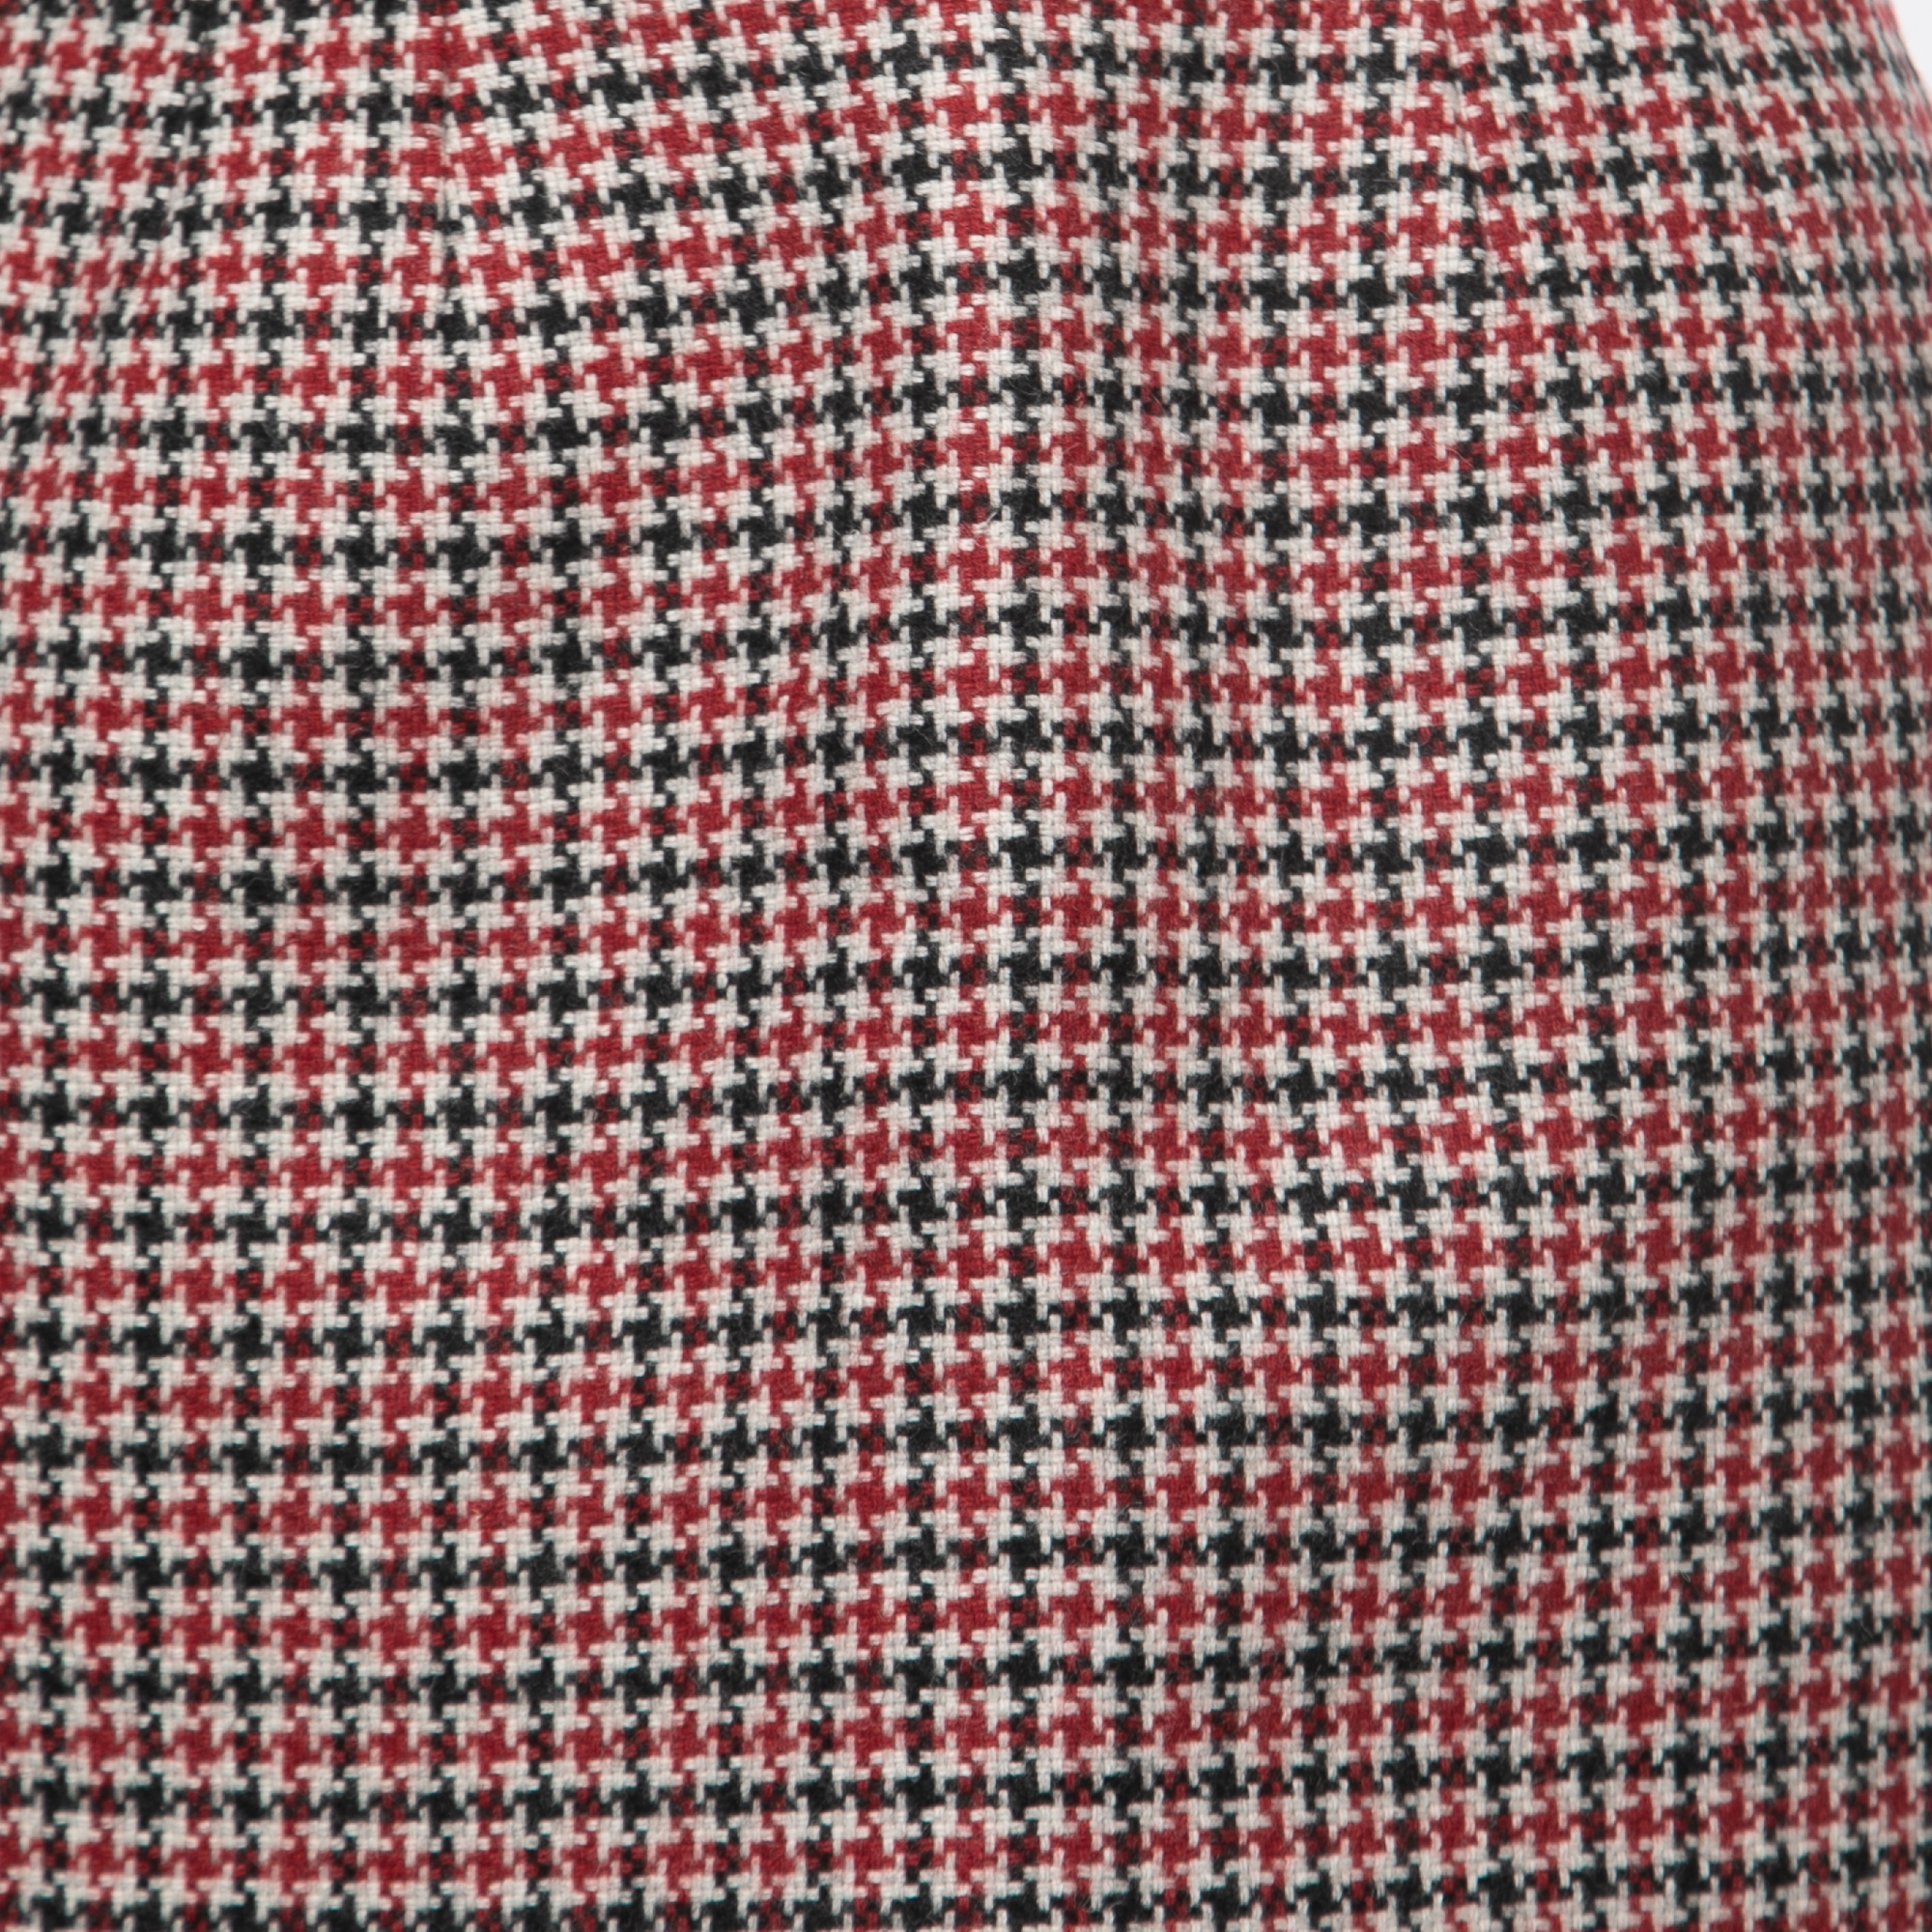 RED Valentino Black/Red Patterned Wool Mini Skirt S